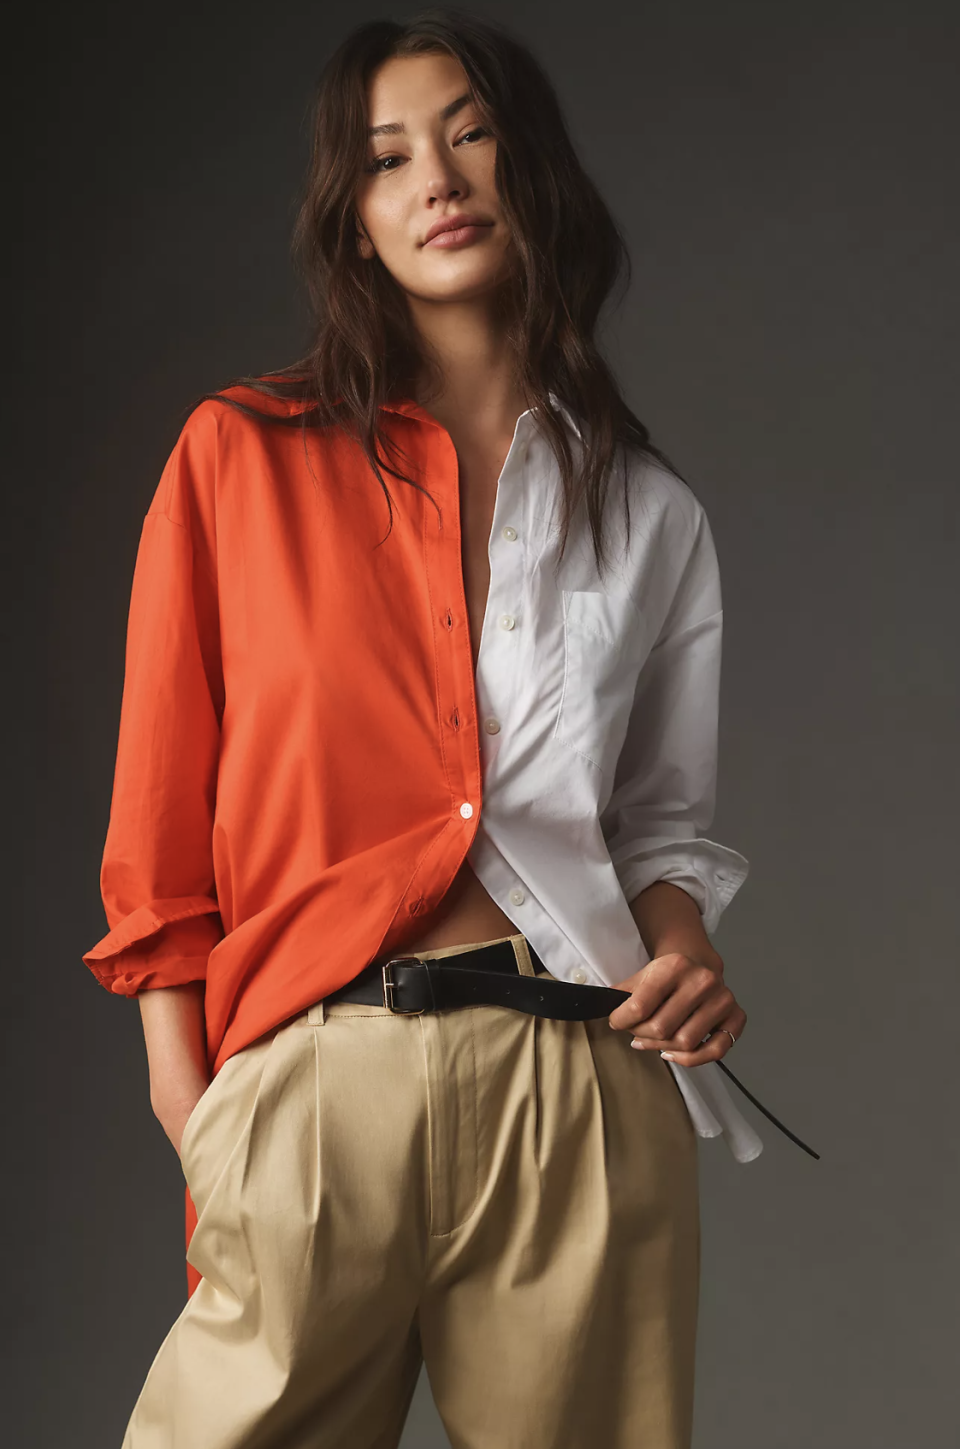 The Bennet Buttondown Shirt by Maeve: Colorblock Edition (Photo via Anthropologie) 